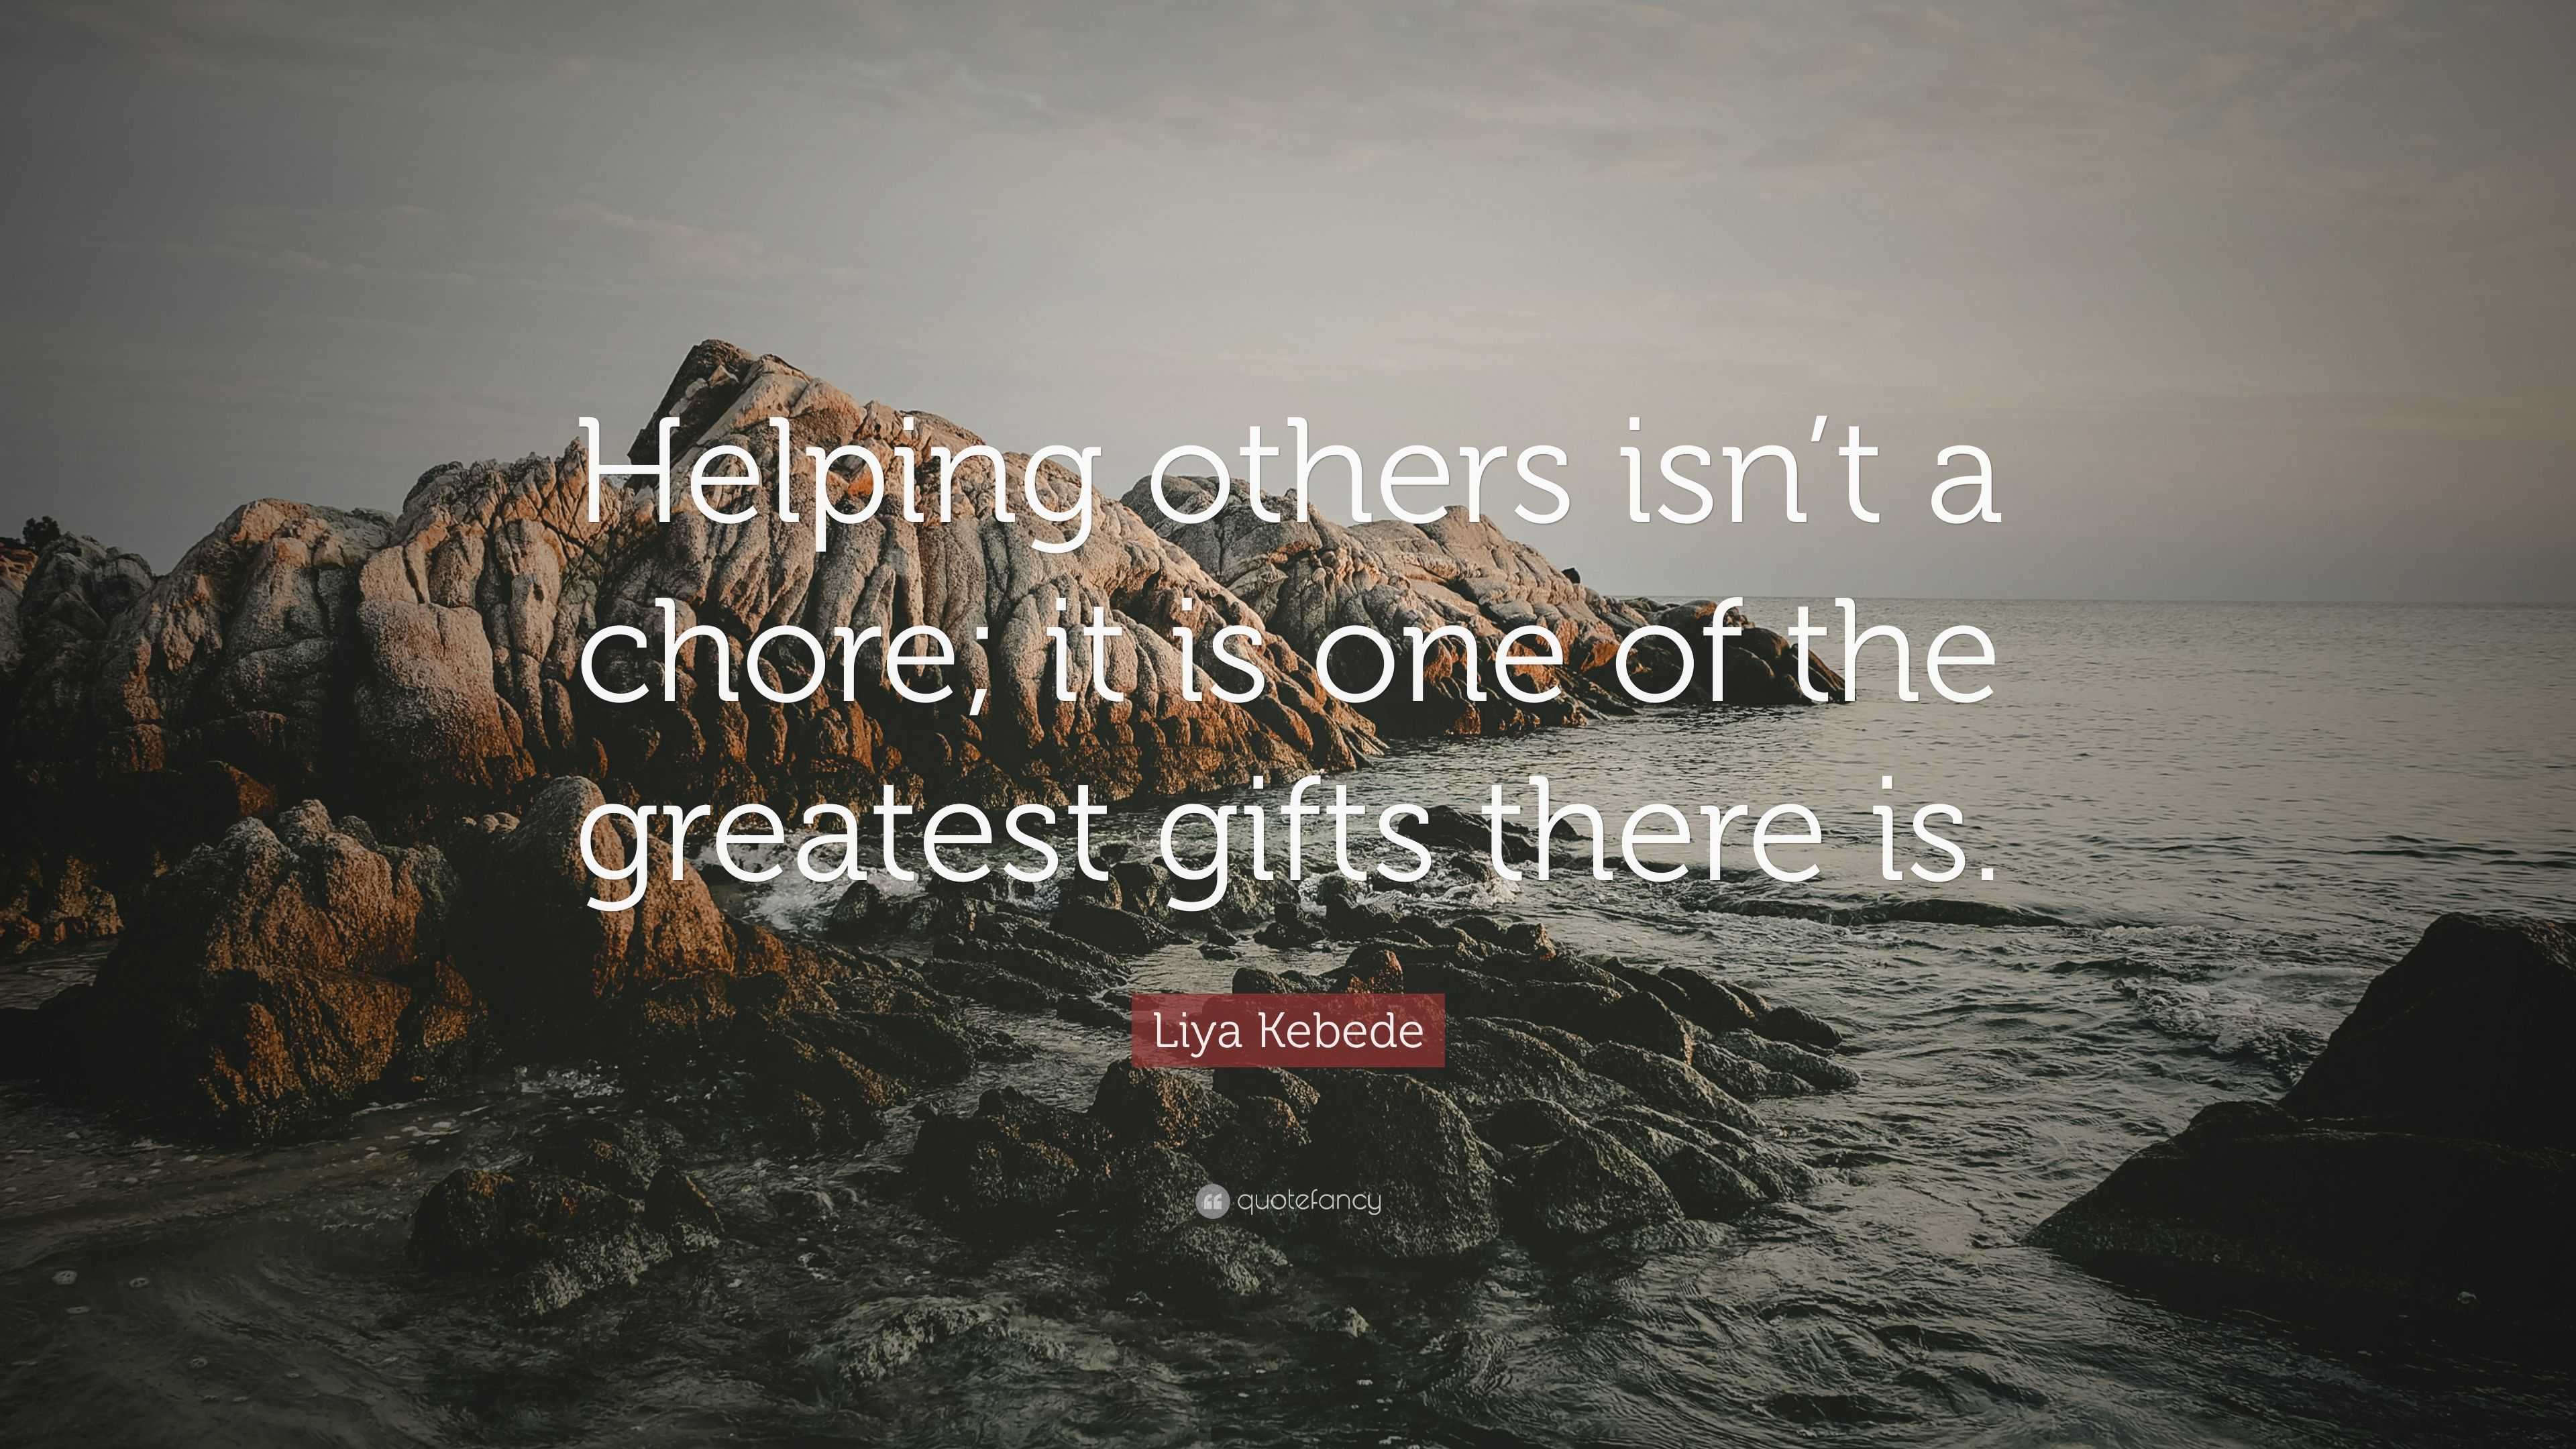 Liya Kebede Quote: “Helping others isn’t a chore; it is one of the ...